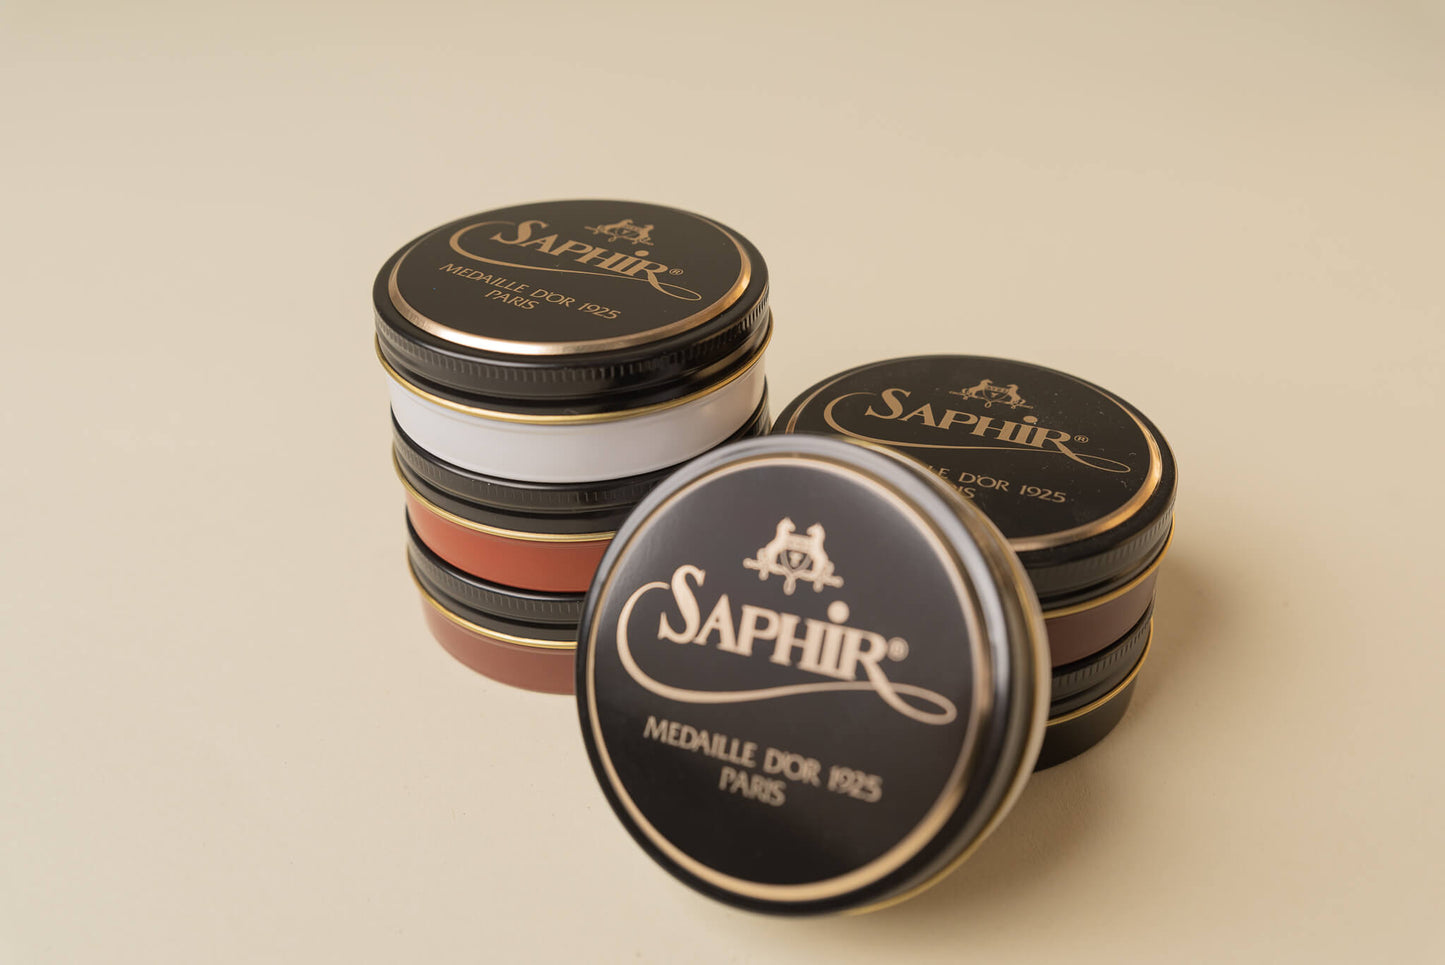 Saphir Medaille d'Or 1925 Paste Wax Polish 50ml display with multiple stacked up